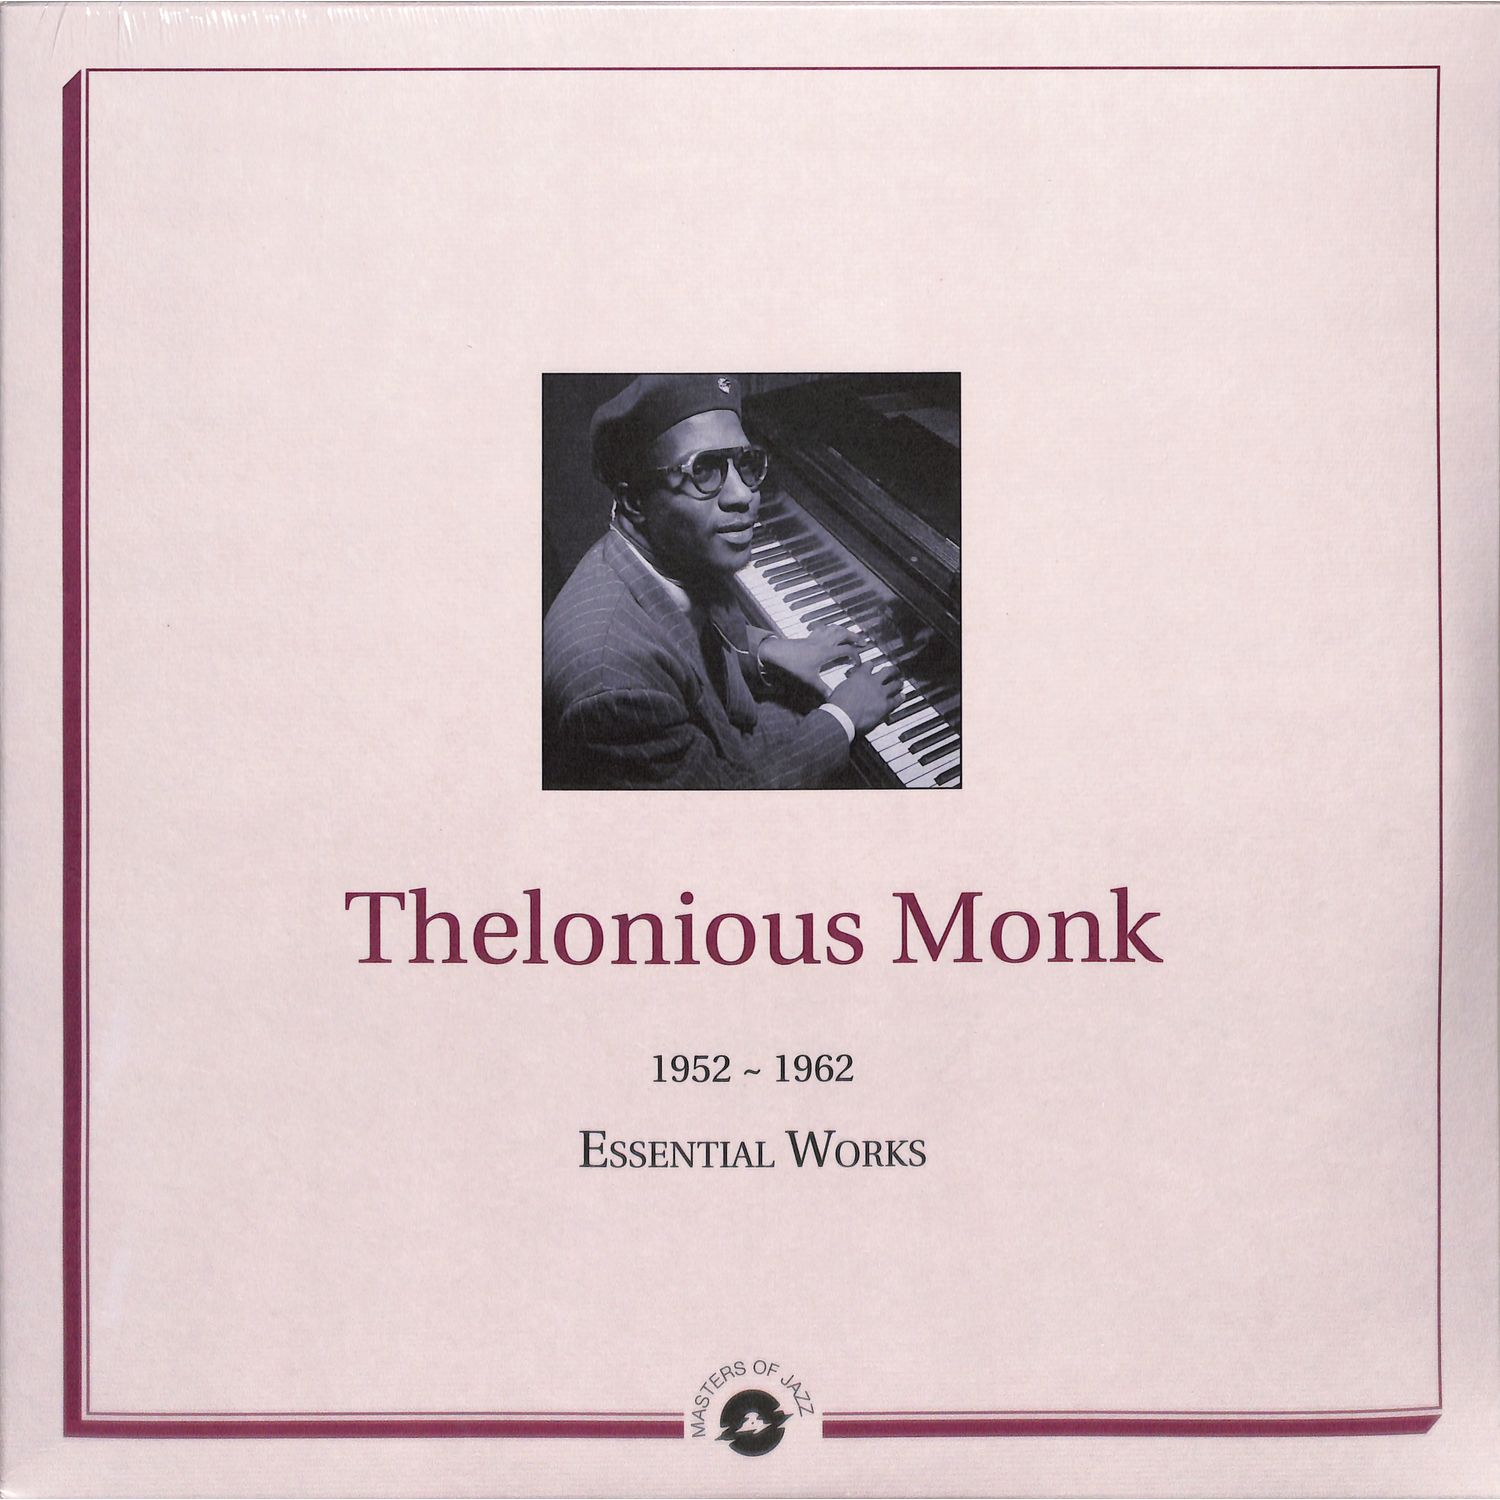 Thelonious Monk - ESSENTIAL WORKS: 1952-1962 